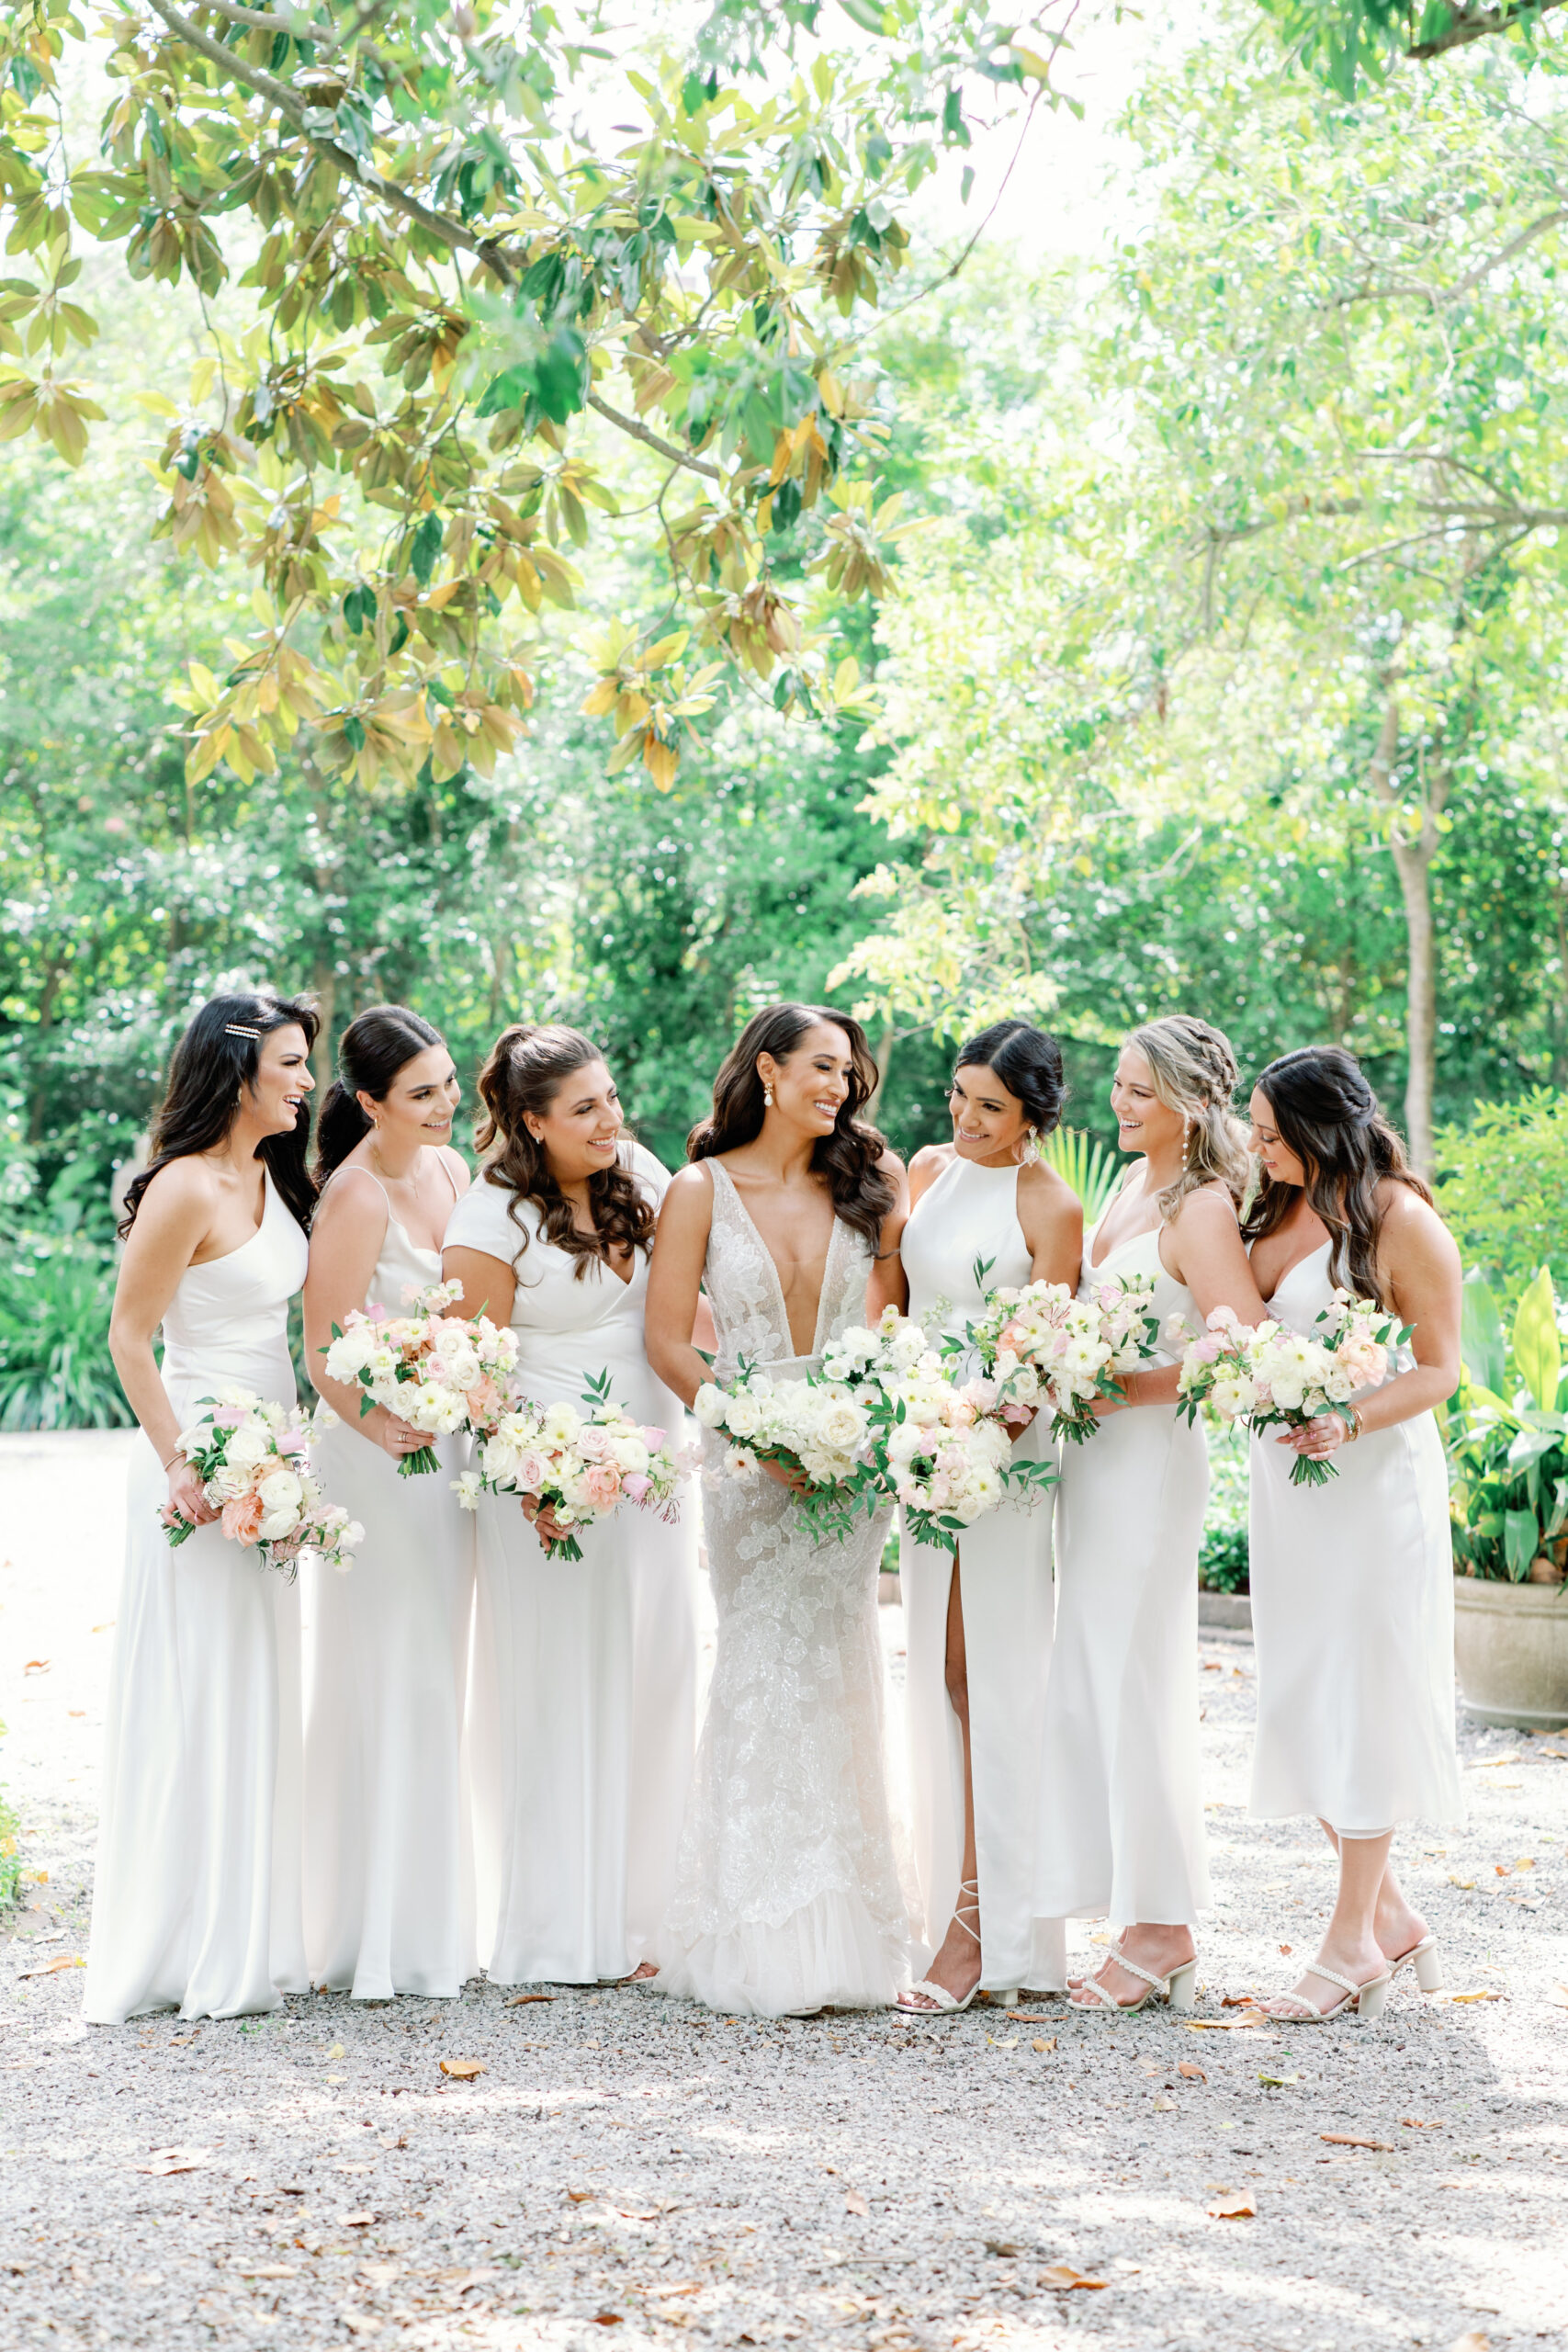 Bridesmaids in all white dresses with different cuts. Spring wedding